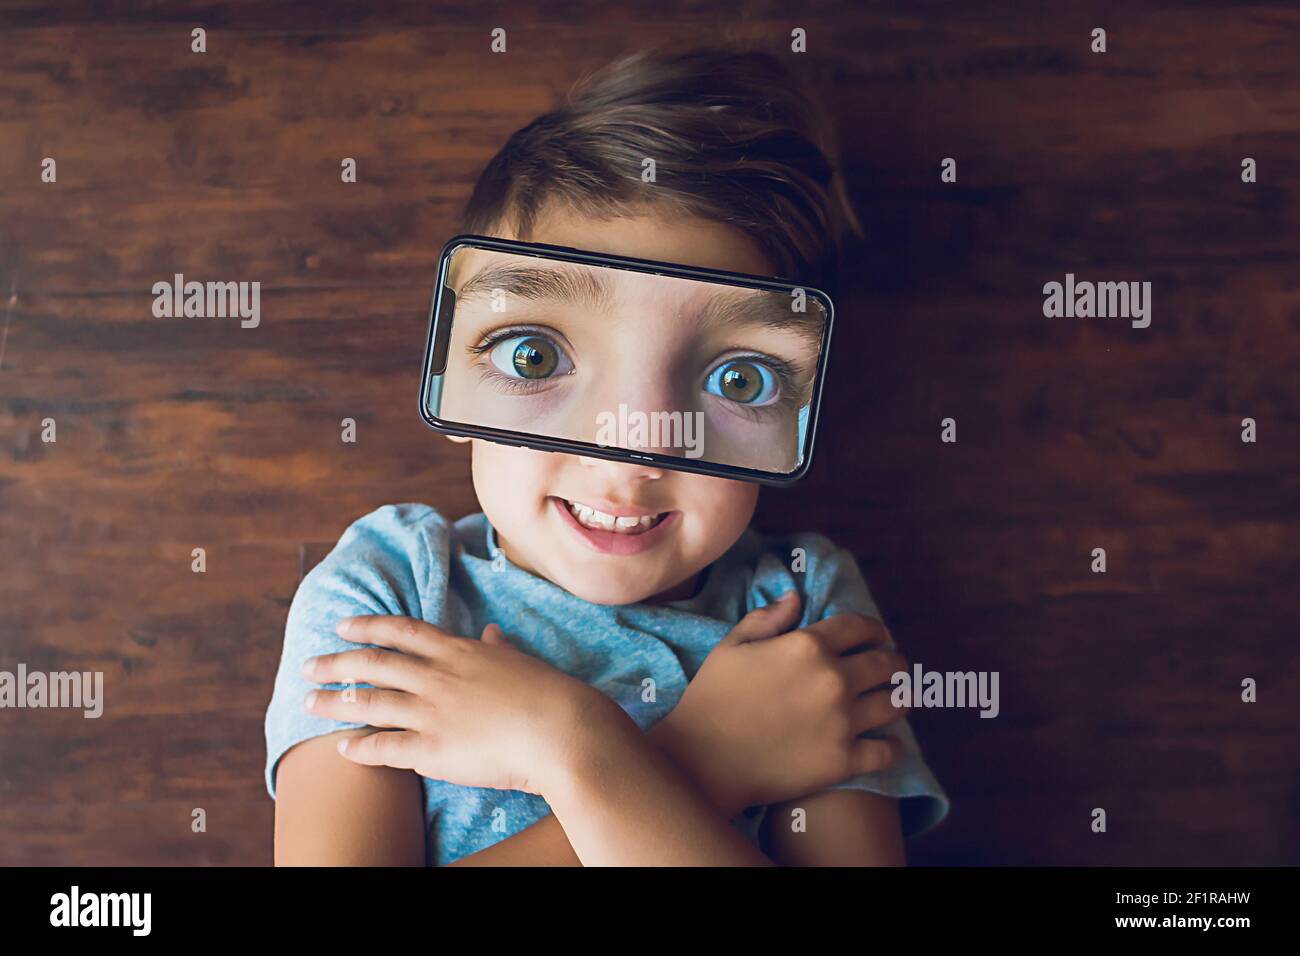 Boy laying on the ground with a phone photo of his eyes on top of face Stock Photo